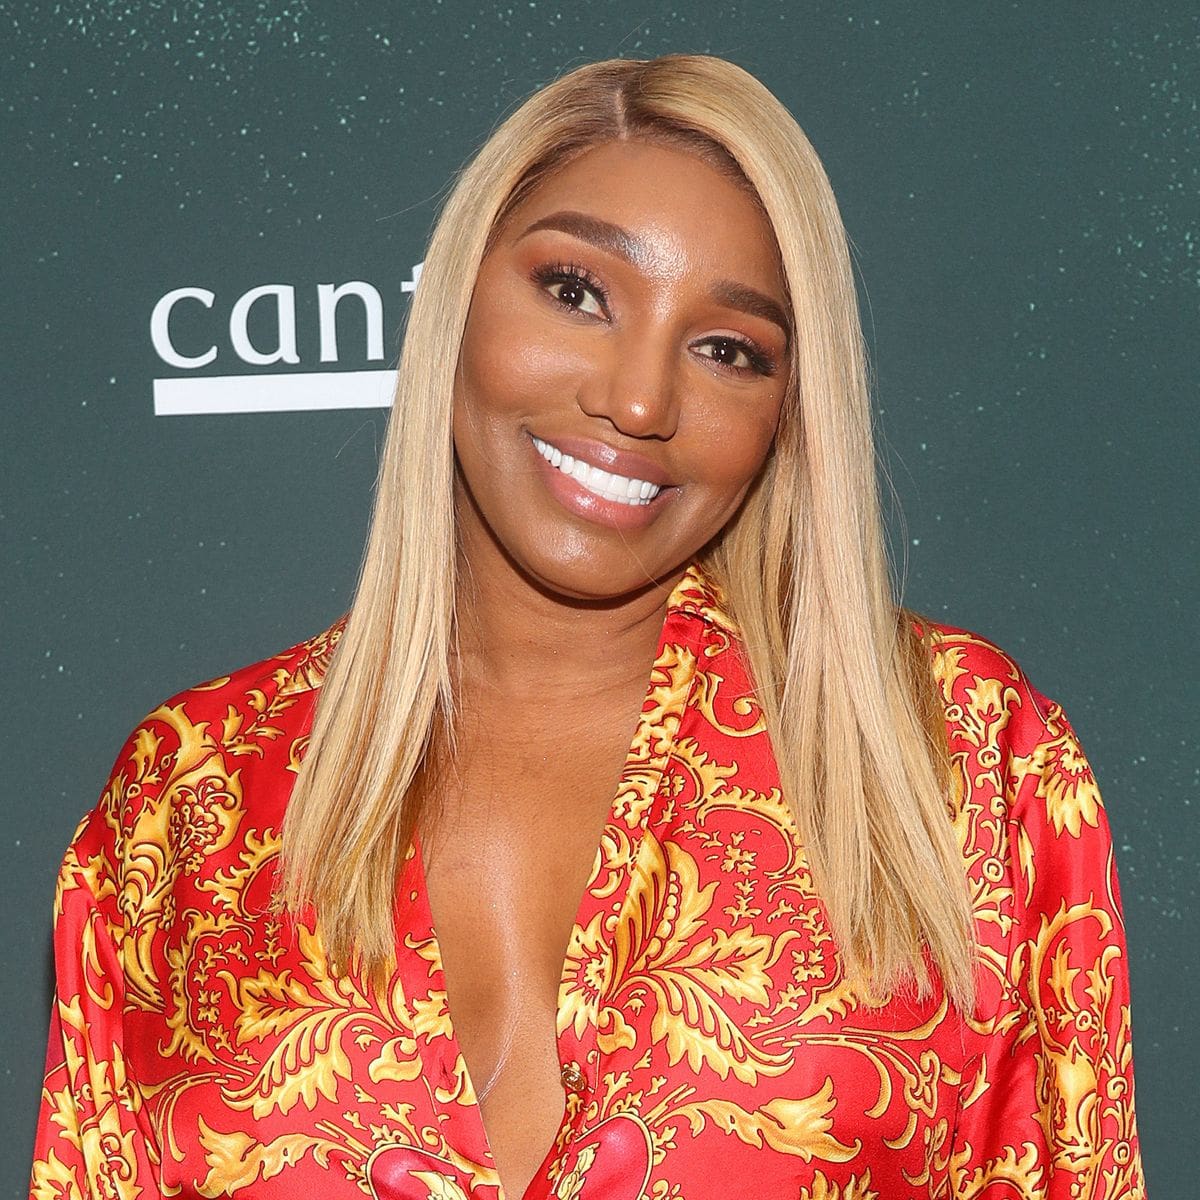 nene-leakes-is-addressing-the-comments-that-claudia-jordan-recently-made-about-her-see-this-video